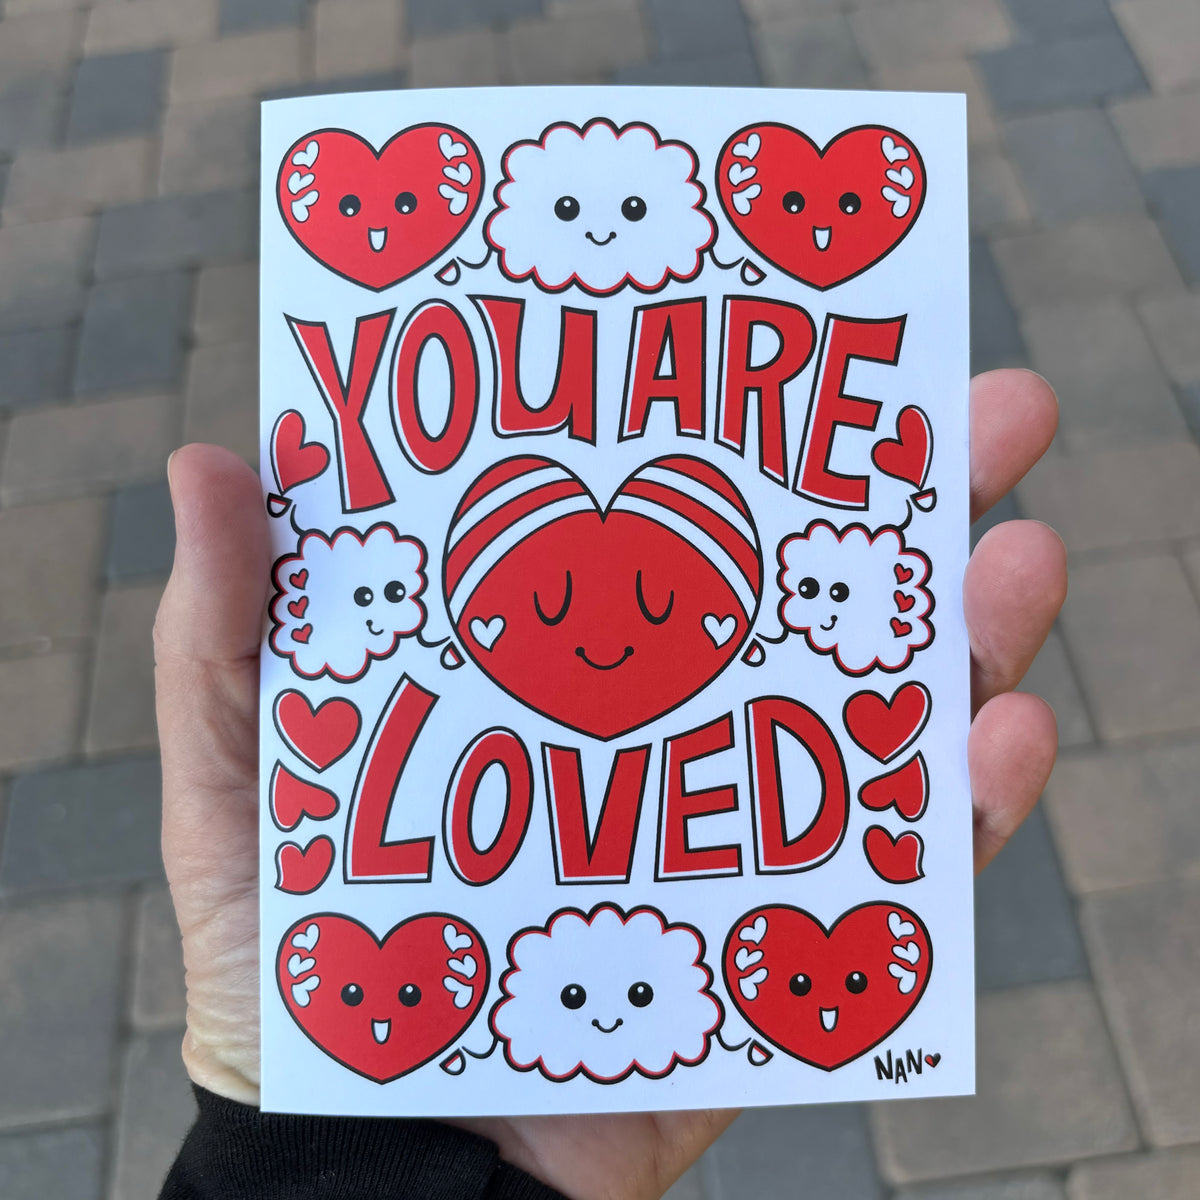 Love ❤️ Love❤️ Love - Set of 6 Greeting Cards